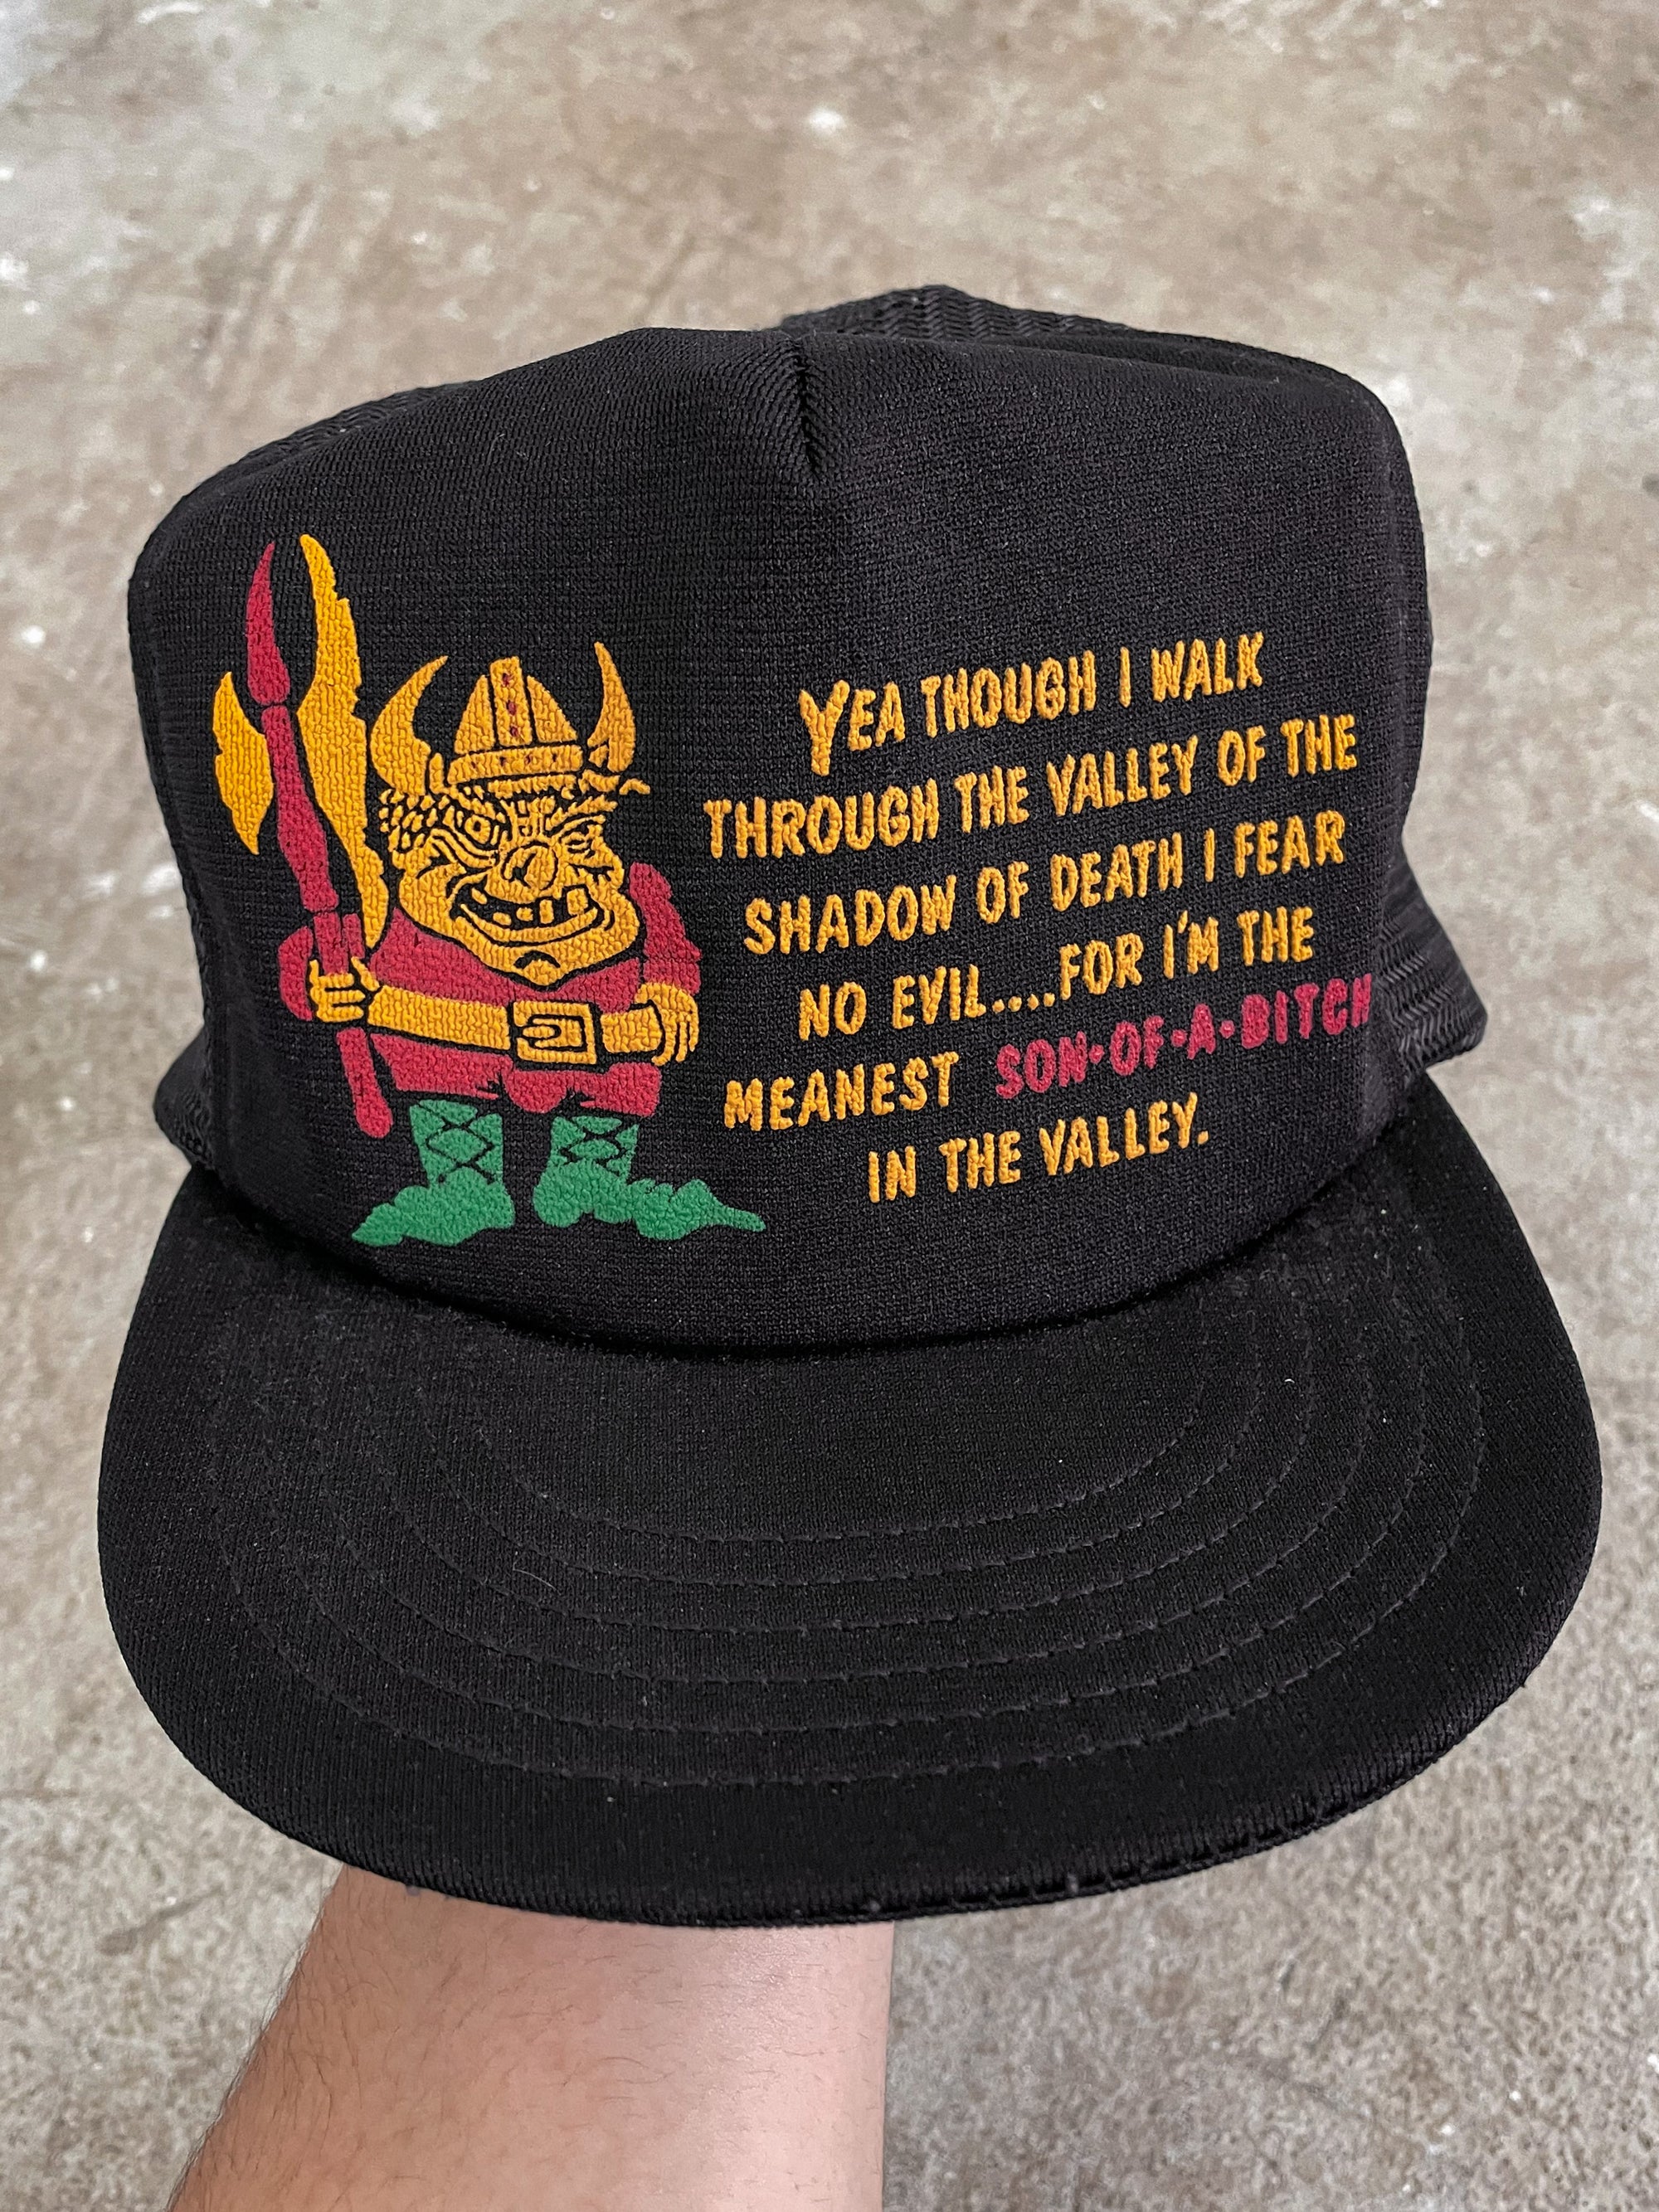 1980s “Meanest Son-Of-A-Bitch” Trucker Hat